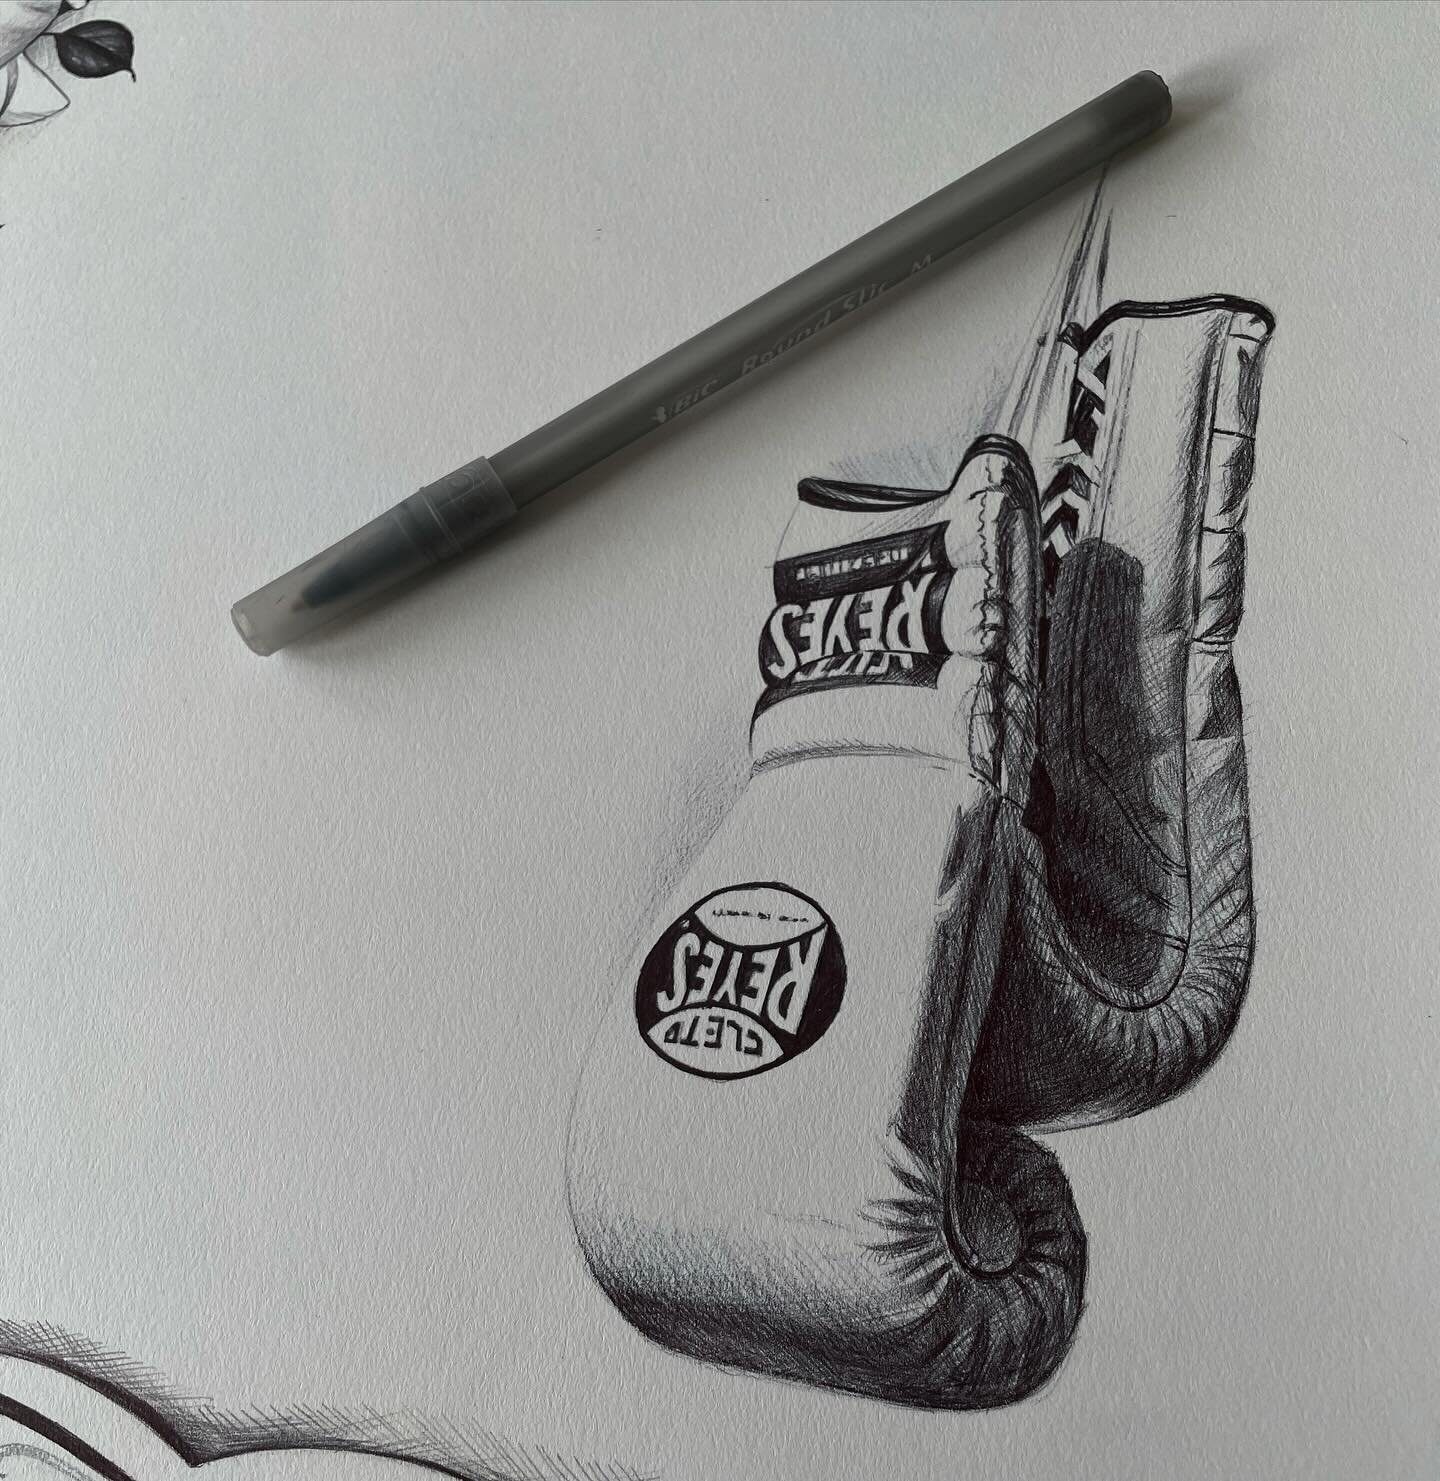 Ball point pen pair of Cletos 🥊 done on an old sheet I was going to fill up and forgot about. #ballpointpen #cletoreyes #boxing